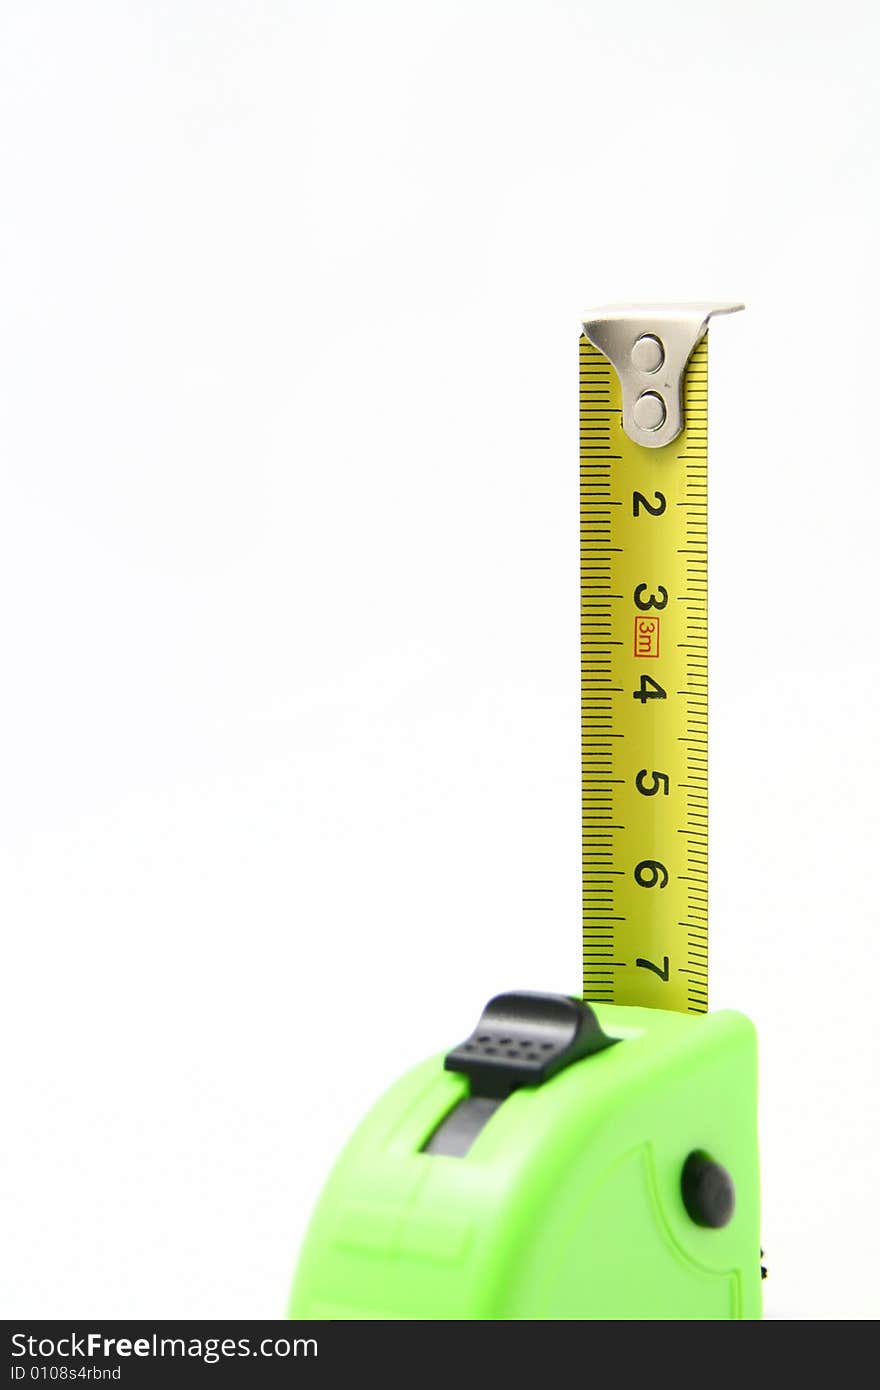 An upright measuring tape with tape partially extended.